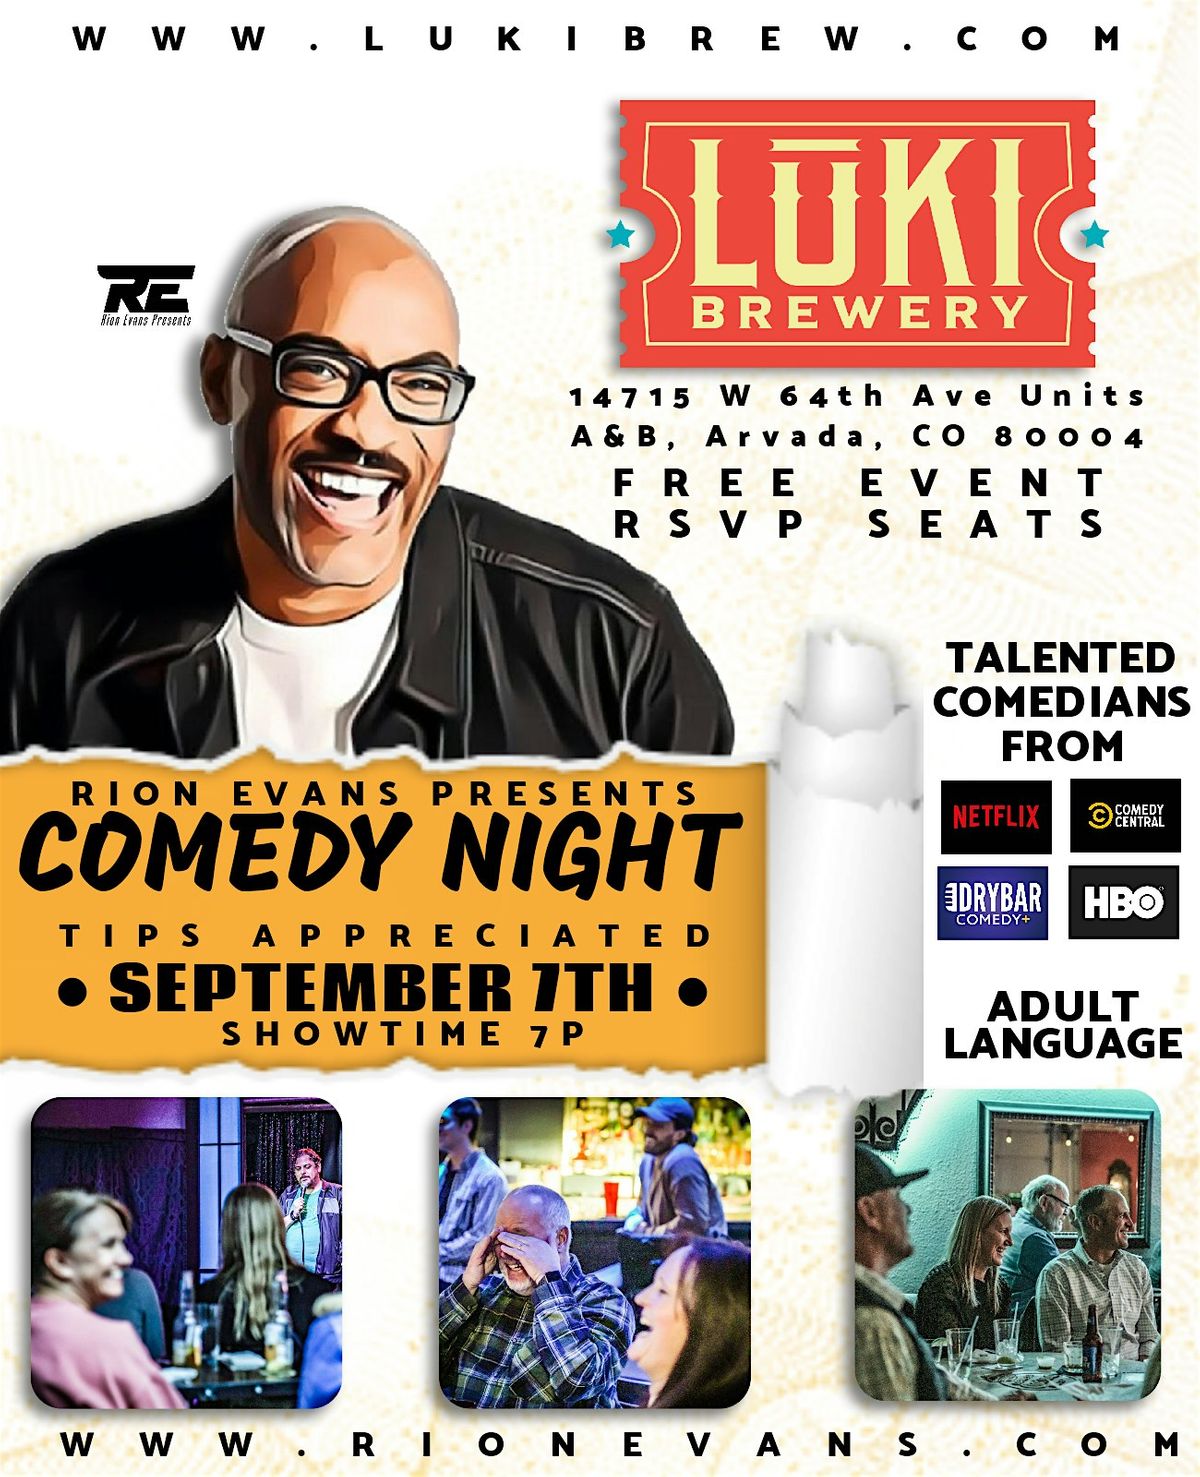 Rion Evans Presents Comedy Night at LUKI Brewery